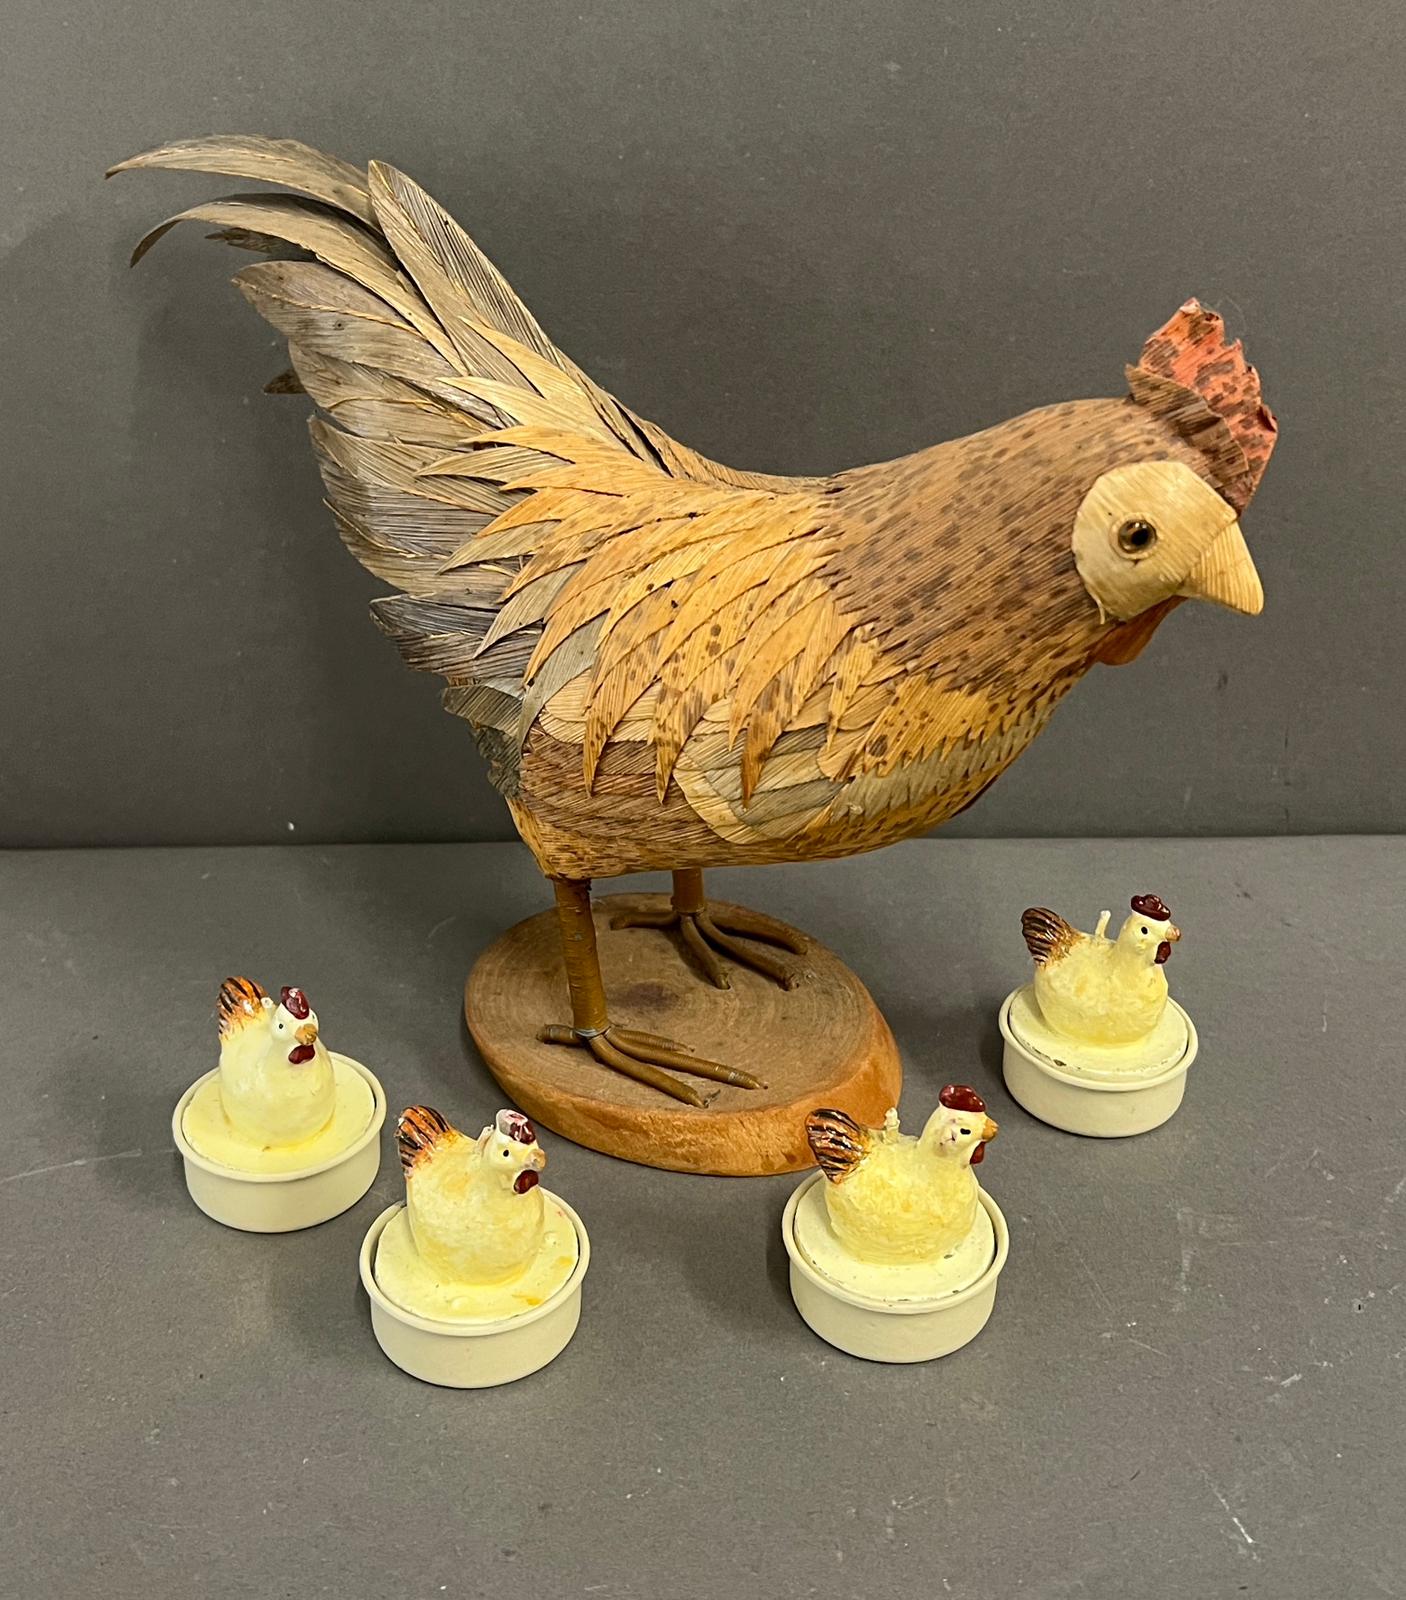 A model chicken and four tee lights in the form of chickens